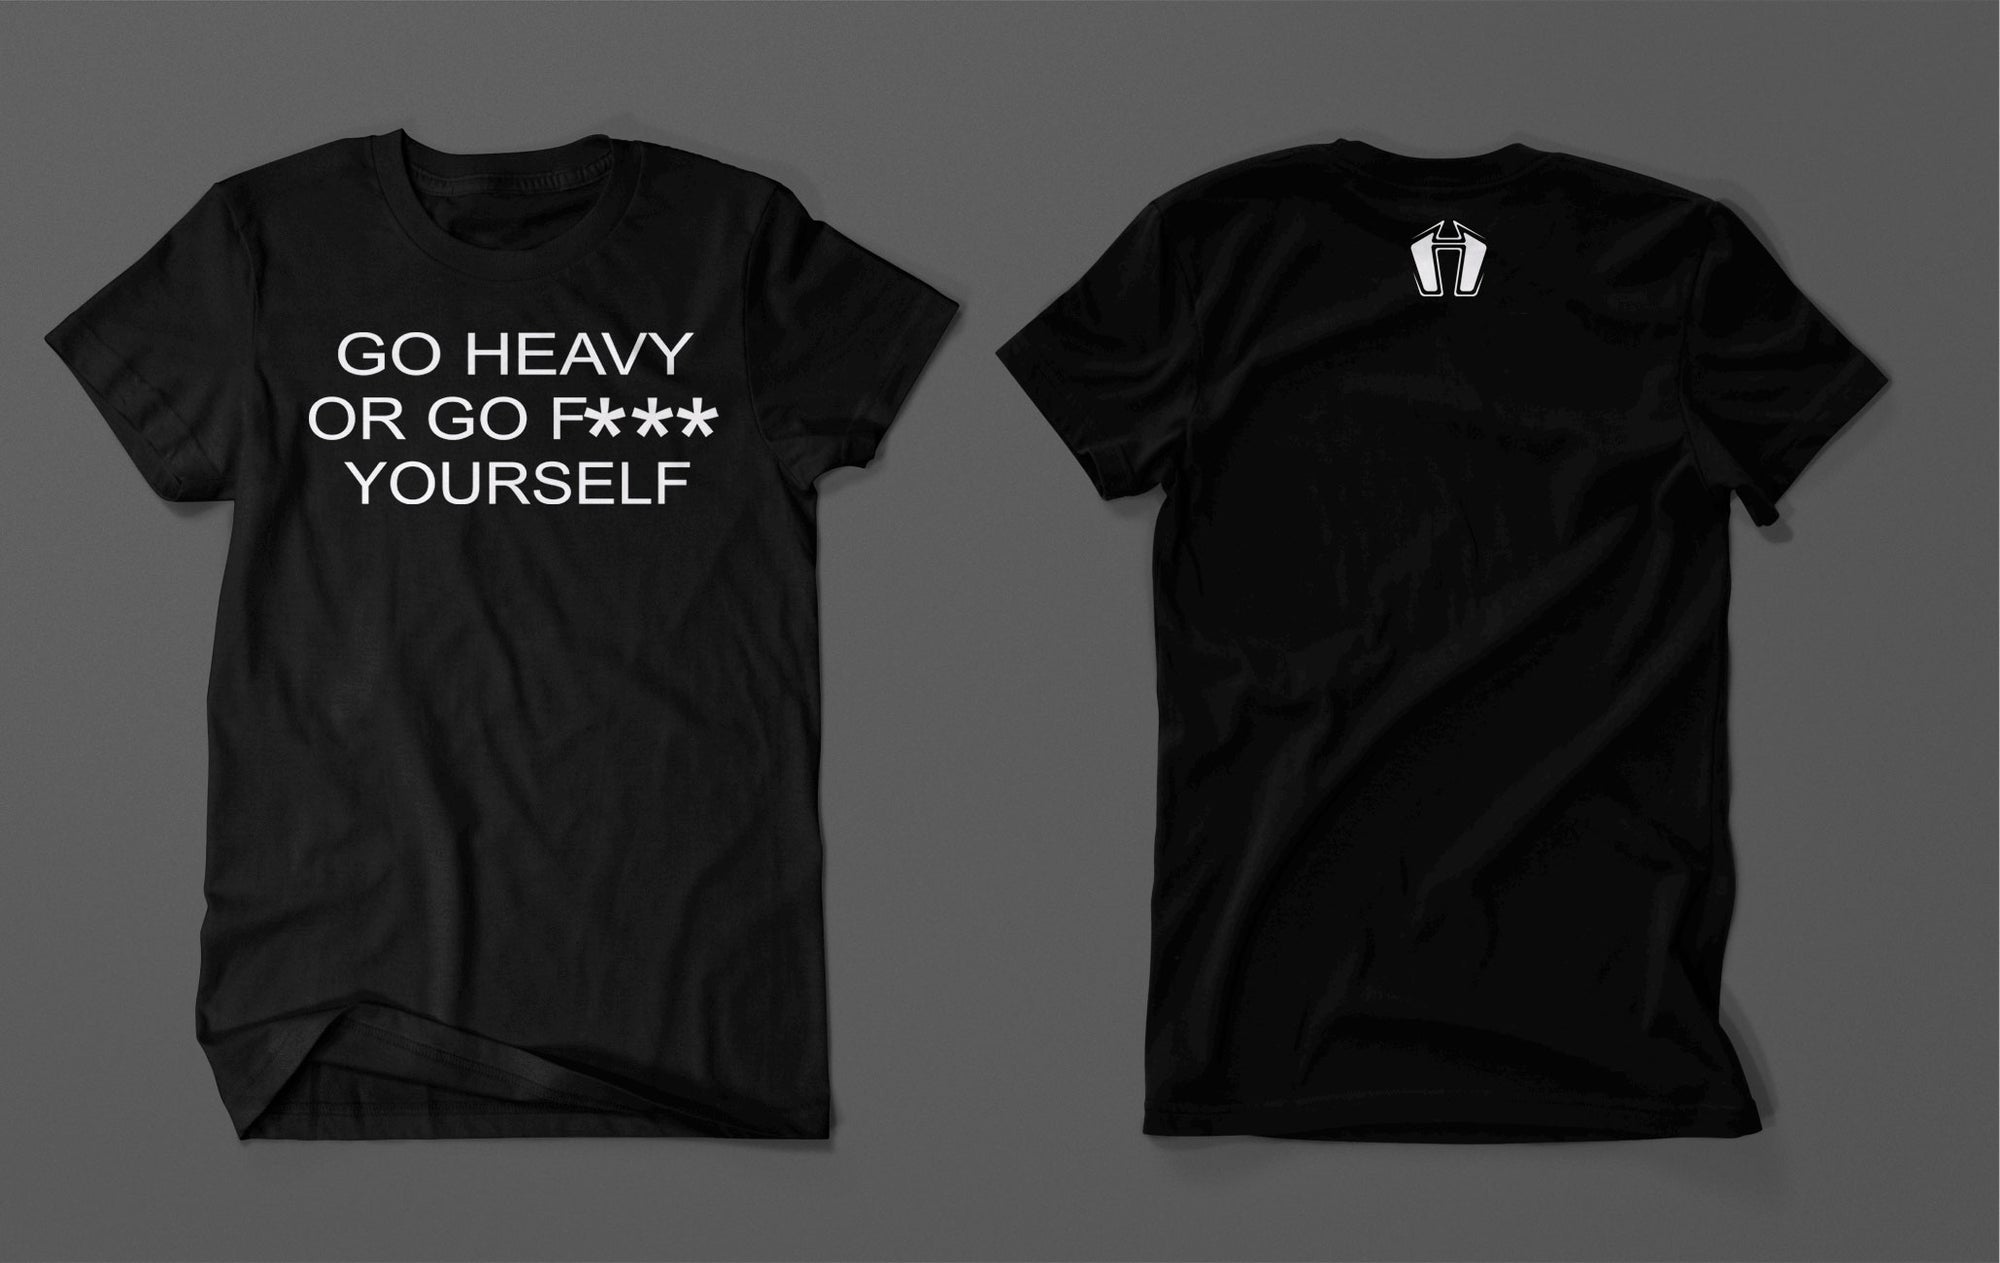 GO HEAVY OR GO F*** YOURSELF t-shirt